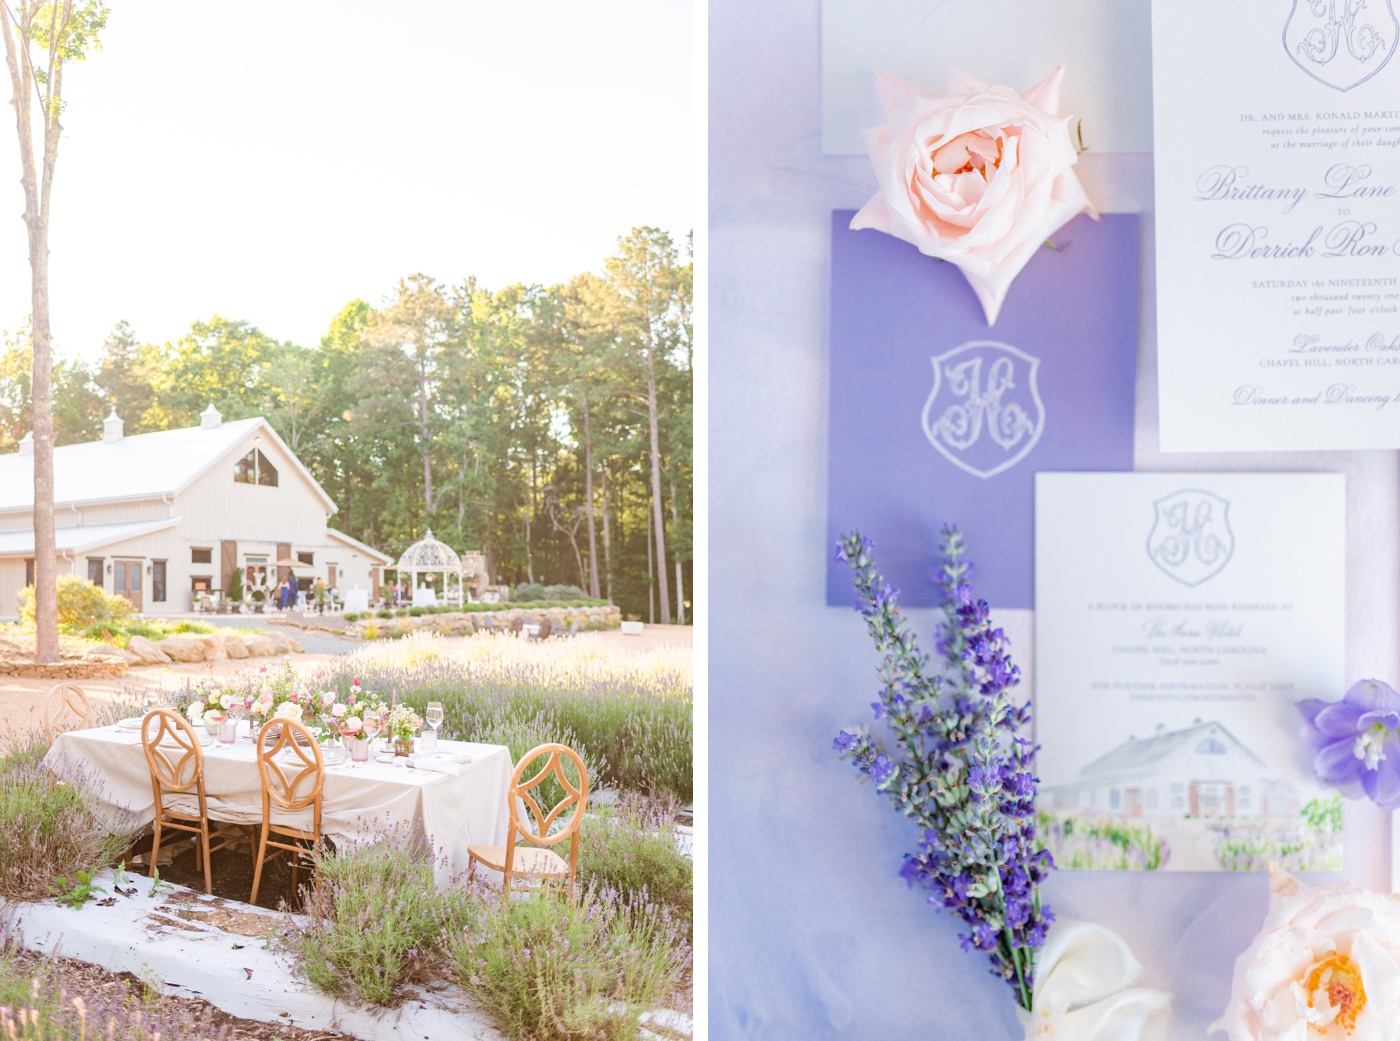 White and lavender stationery for a styled shoot at Lavender Oaks